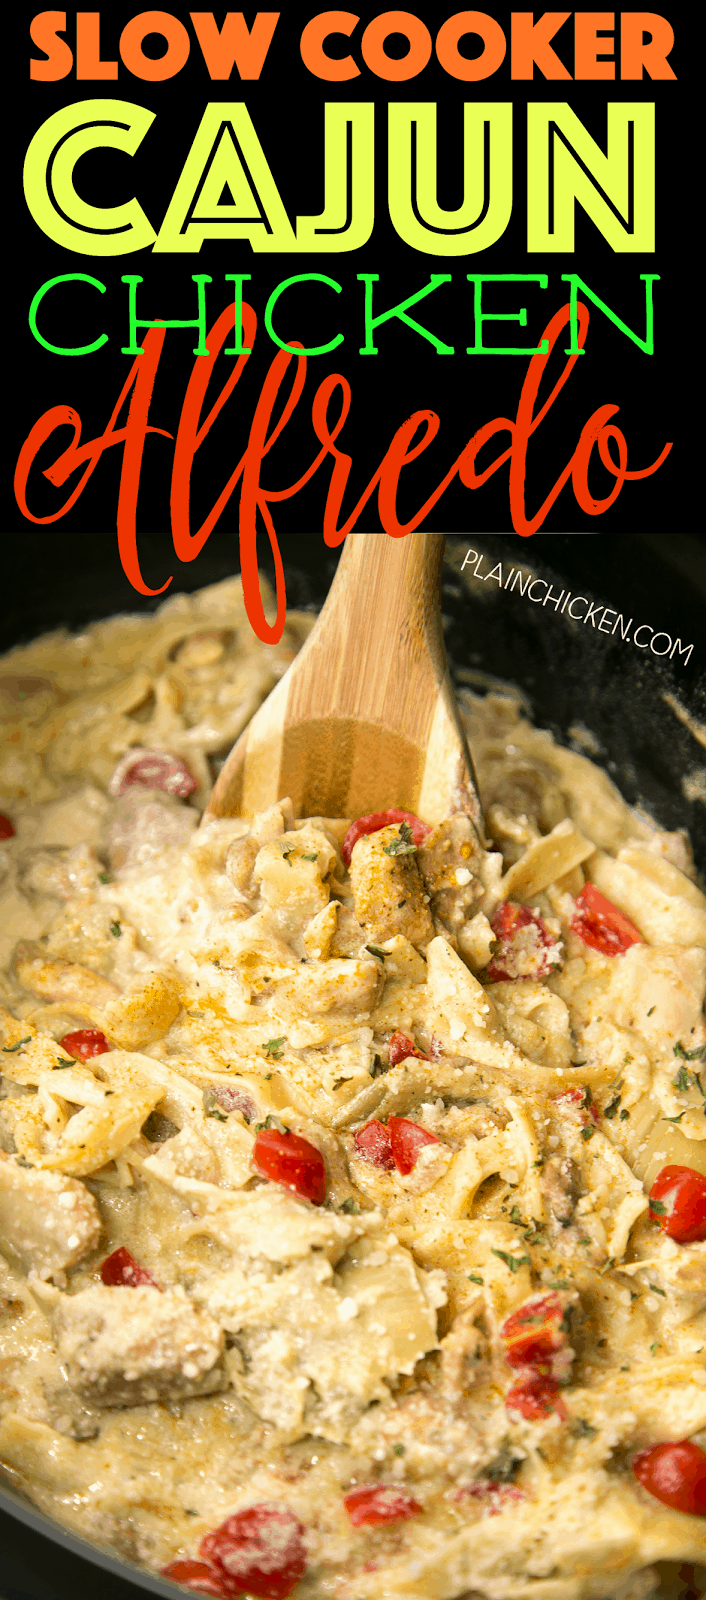 Slow Cooker Cajun Chicken Alfredo - everything cooks in the slow cooker, even the pasta! This is AMAZING!!! Chicken thighs, artichoke hearts, alfredo sauce, chicken broth, egg noodles, parmesan cheese and tomatoes. Everyone cleaned their plates! Definitely going into the rotation!